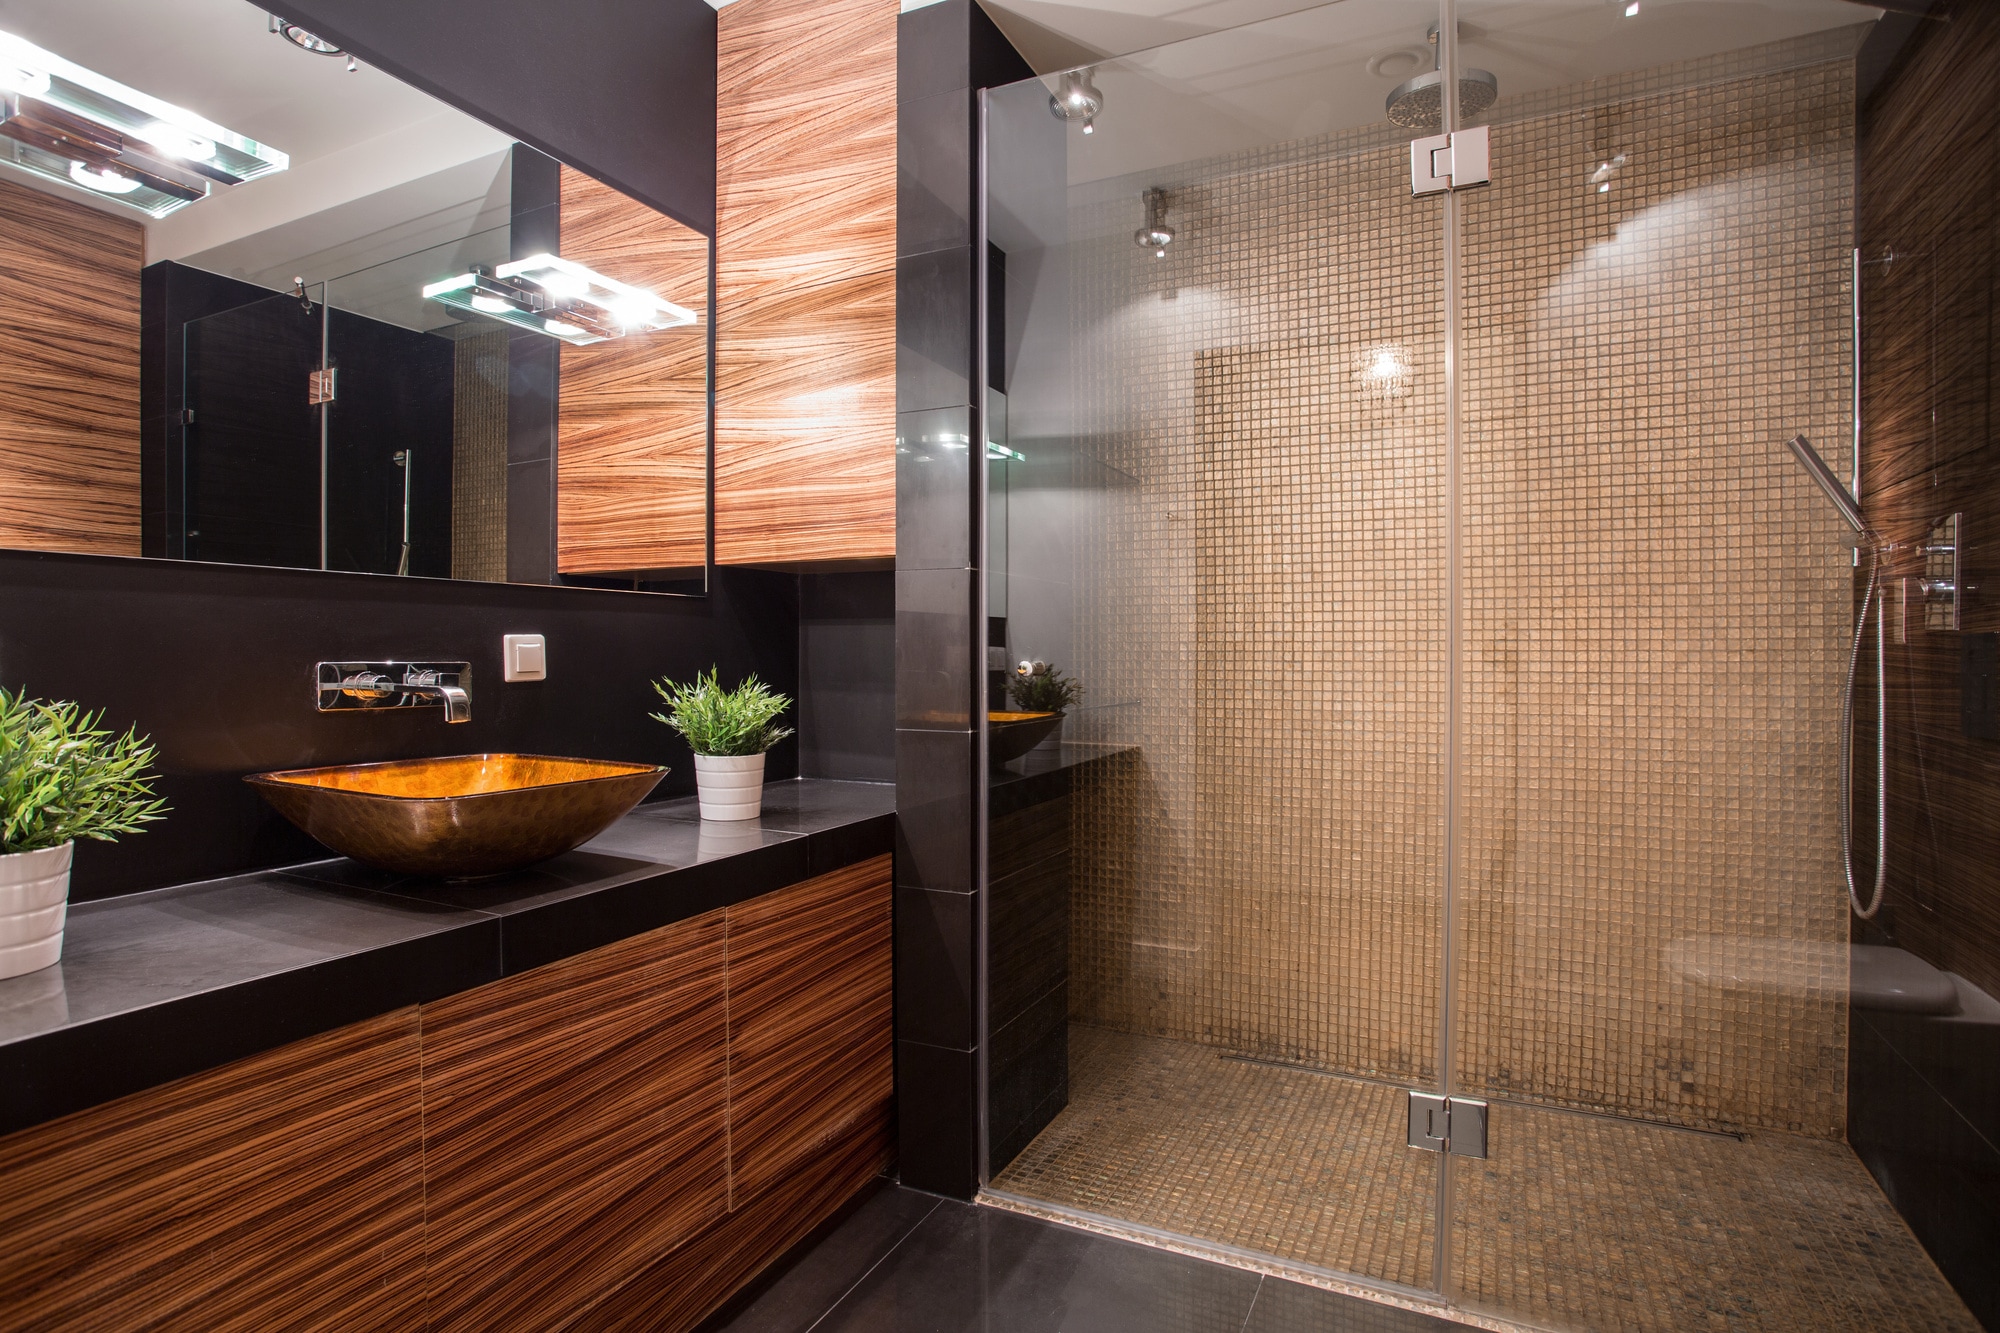 8 Modern Bathroom Ideas to Add Style and Value to Your Home - MoDern Bathroom IDeas